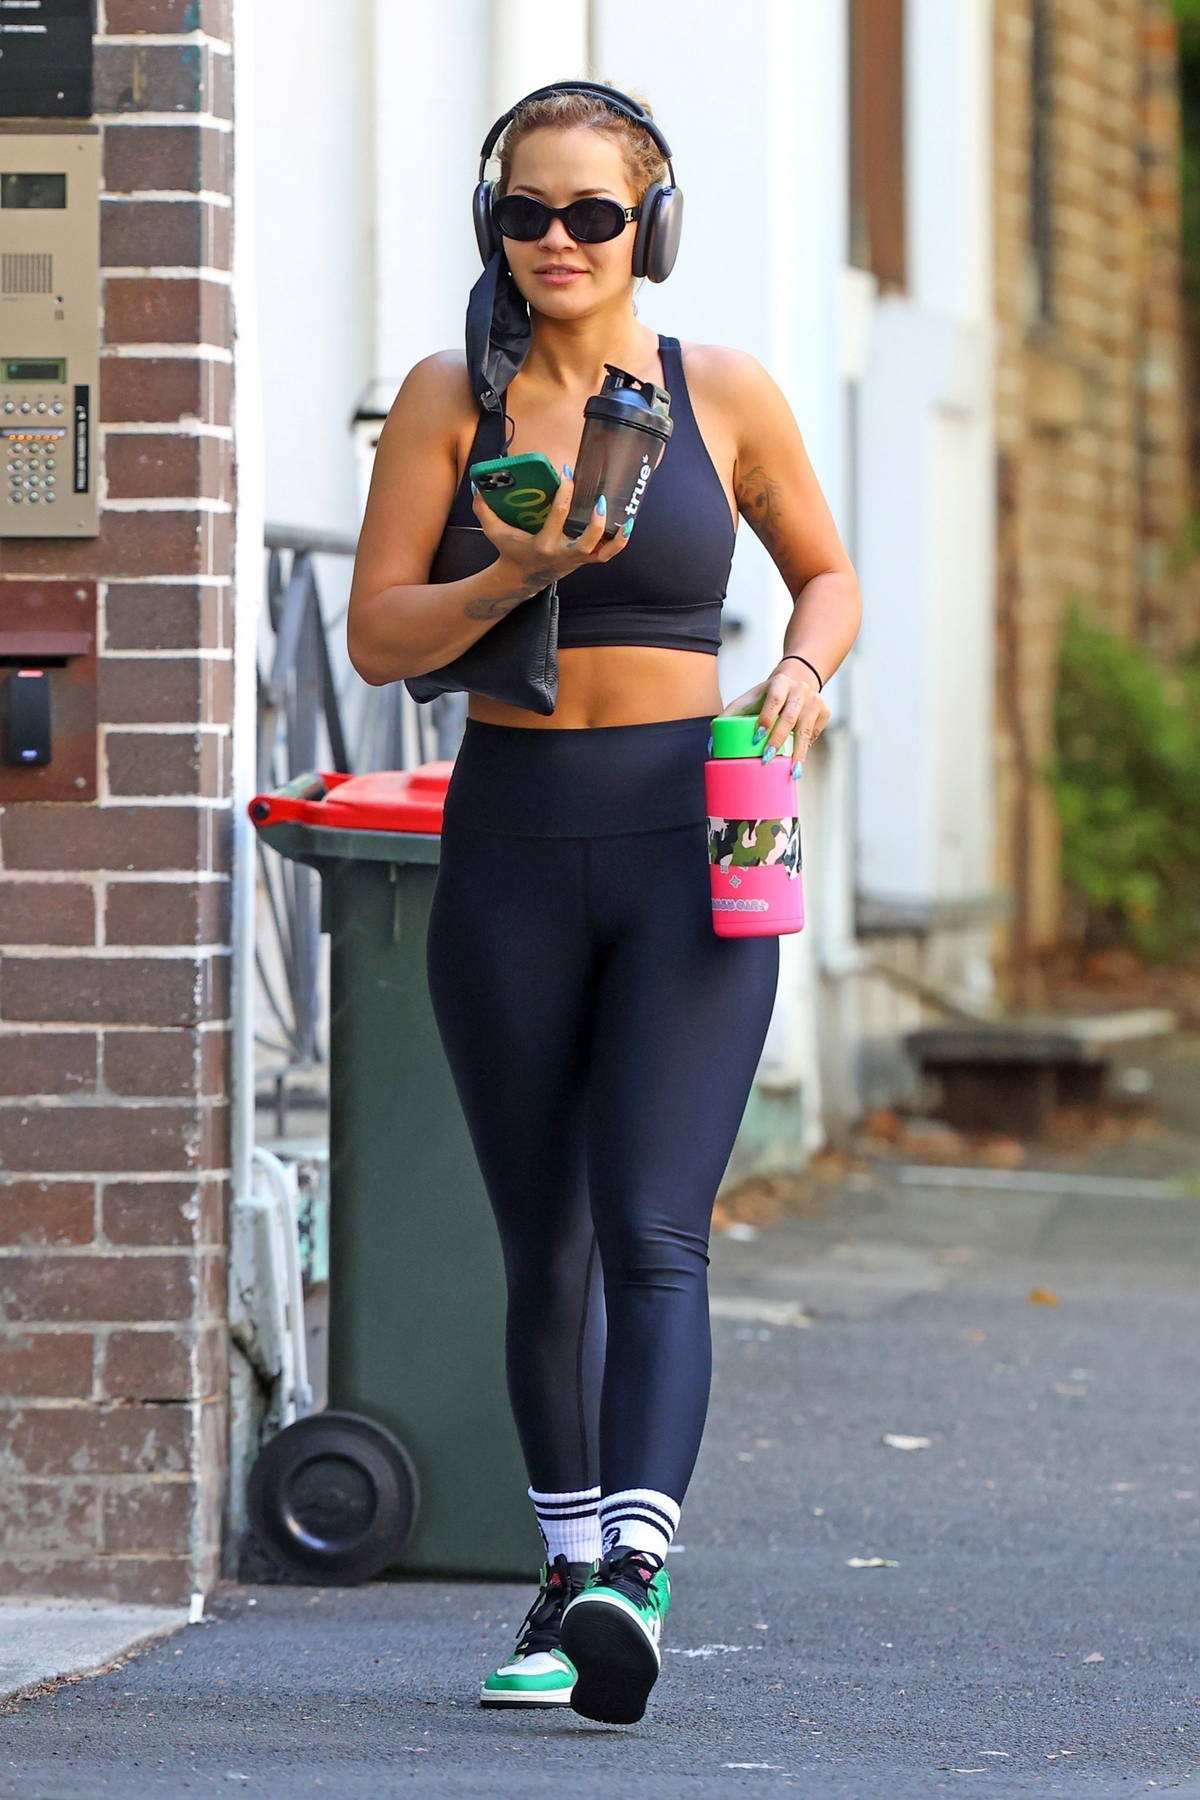 https://www.celebsfirst.com/wp-content/uploads/2022/01/rita-ora-rocks-a-navy-blue-sports-bra-and-leggings-with-nike-dunks-for-a-gym-session-in-sydney-australia-270122_5.jpg